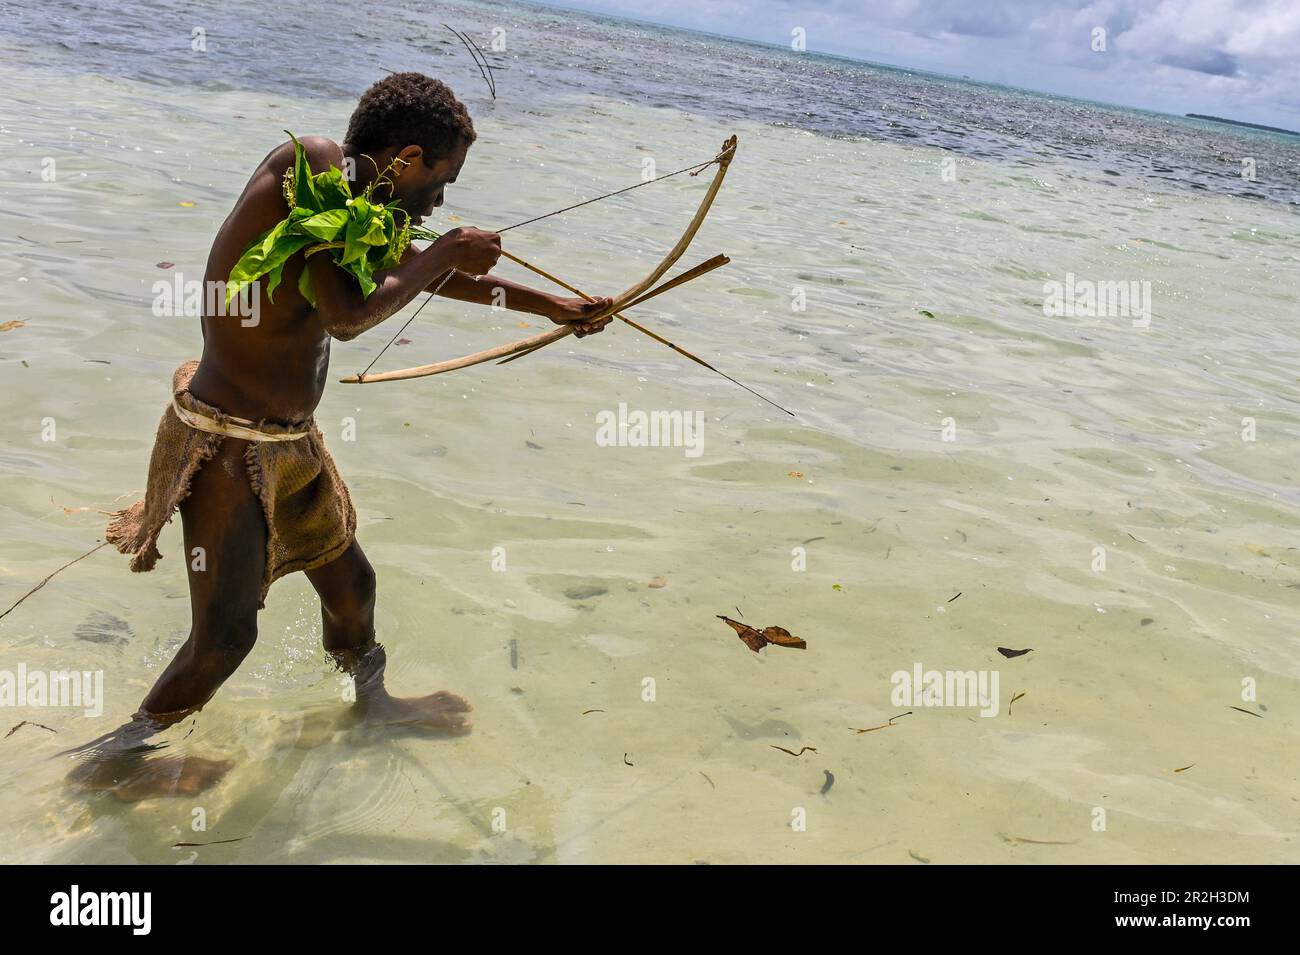 https://c8.alamy.com/comp/2R2H3DM/in-the-solomon-islands-the-arch-used-for-fishing-is-typically-made-from-locally-available-materials-such-as-wood-bamboo-or-other-sturdy-plant-materials-skilled-fishermen-utilize-their-knowledge-of-fish-behavior-and-habitat-to-position-themselves-strategically-often-at-fishing-grounds-known-for-their-abundance-of-fish-2R2H3DM.jpg